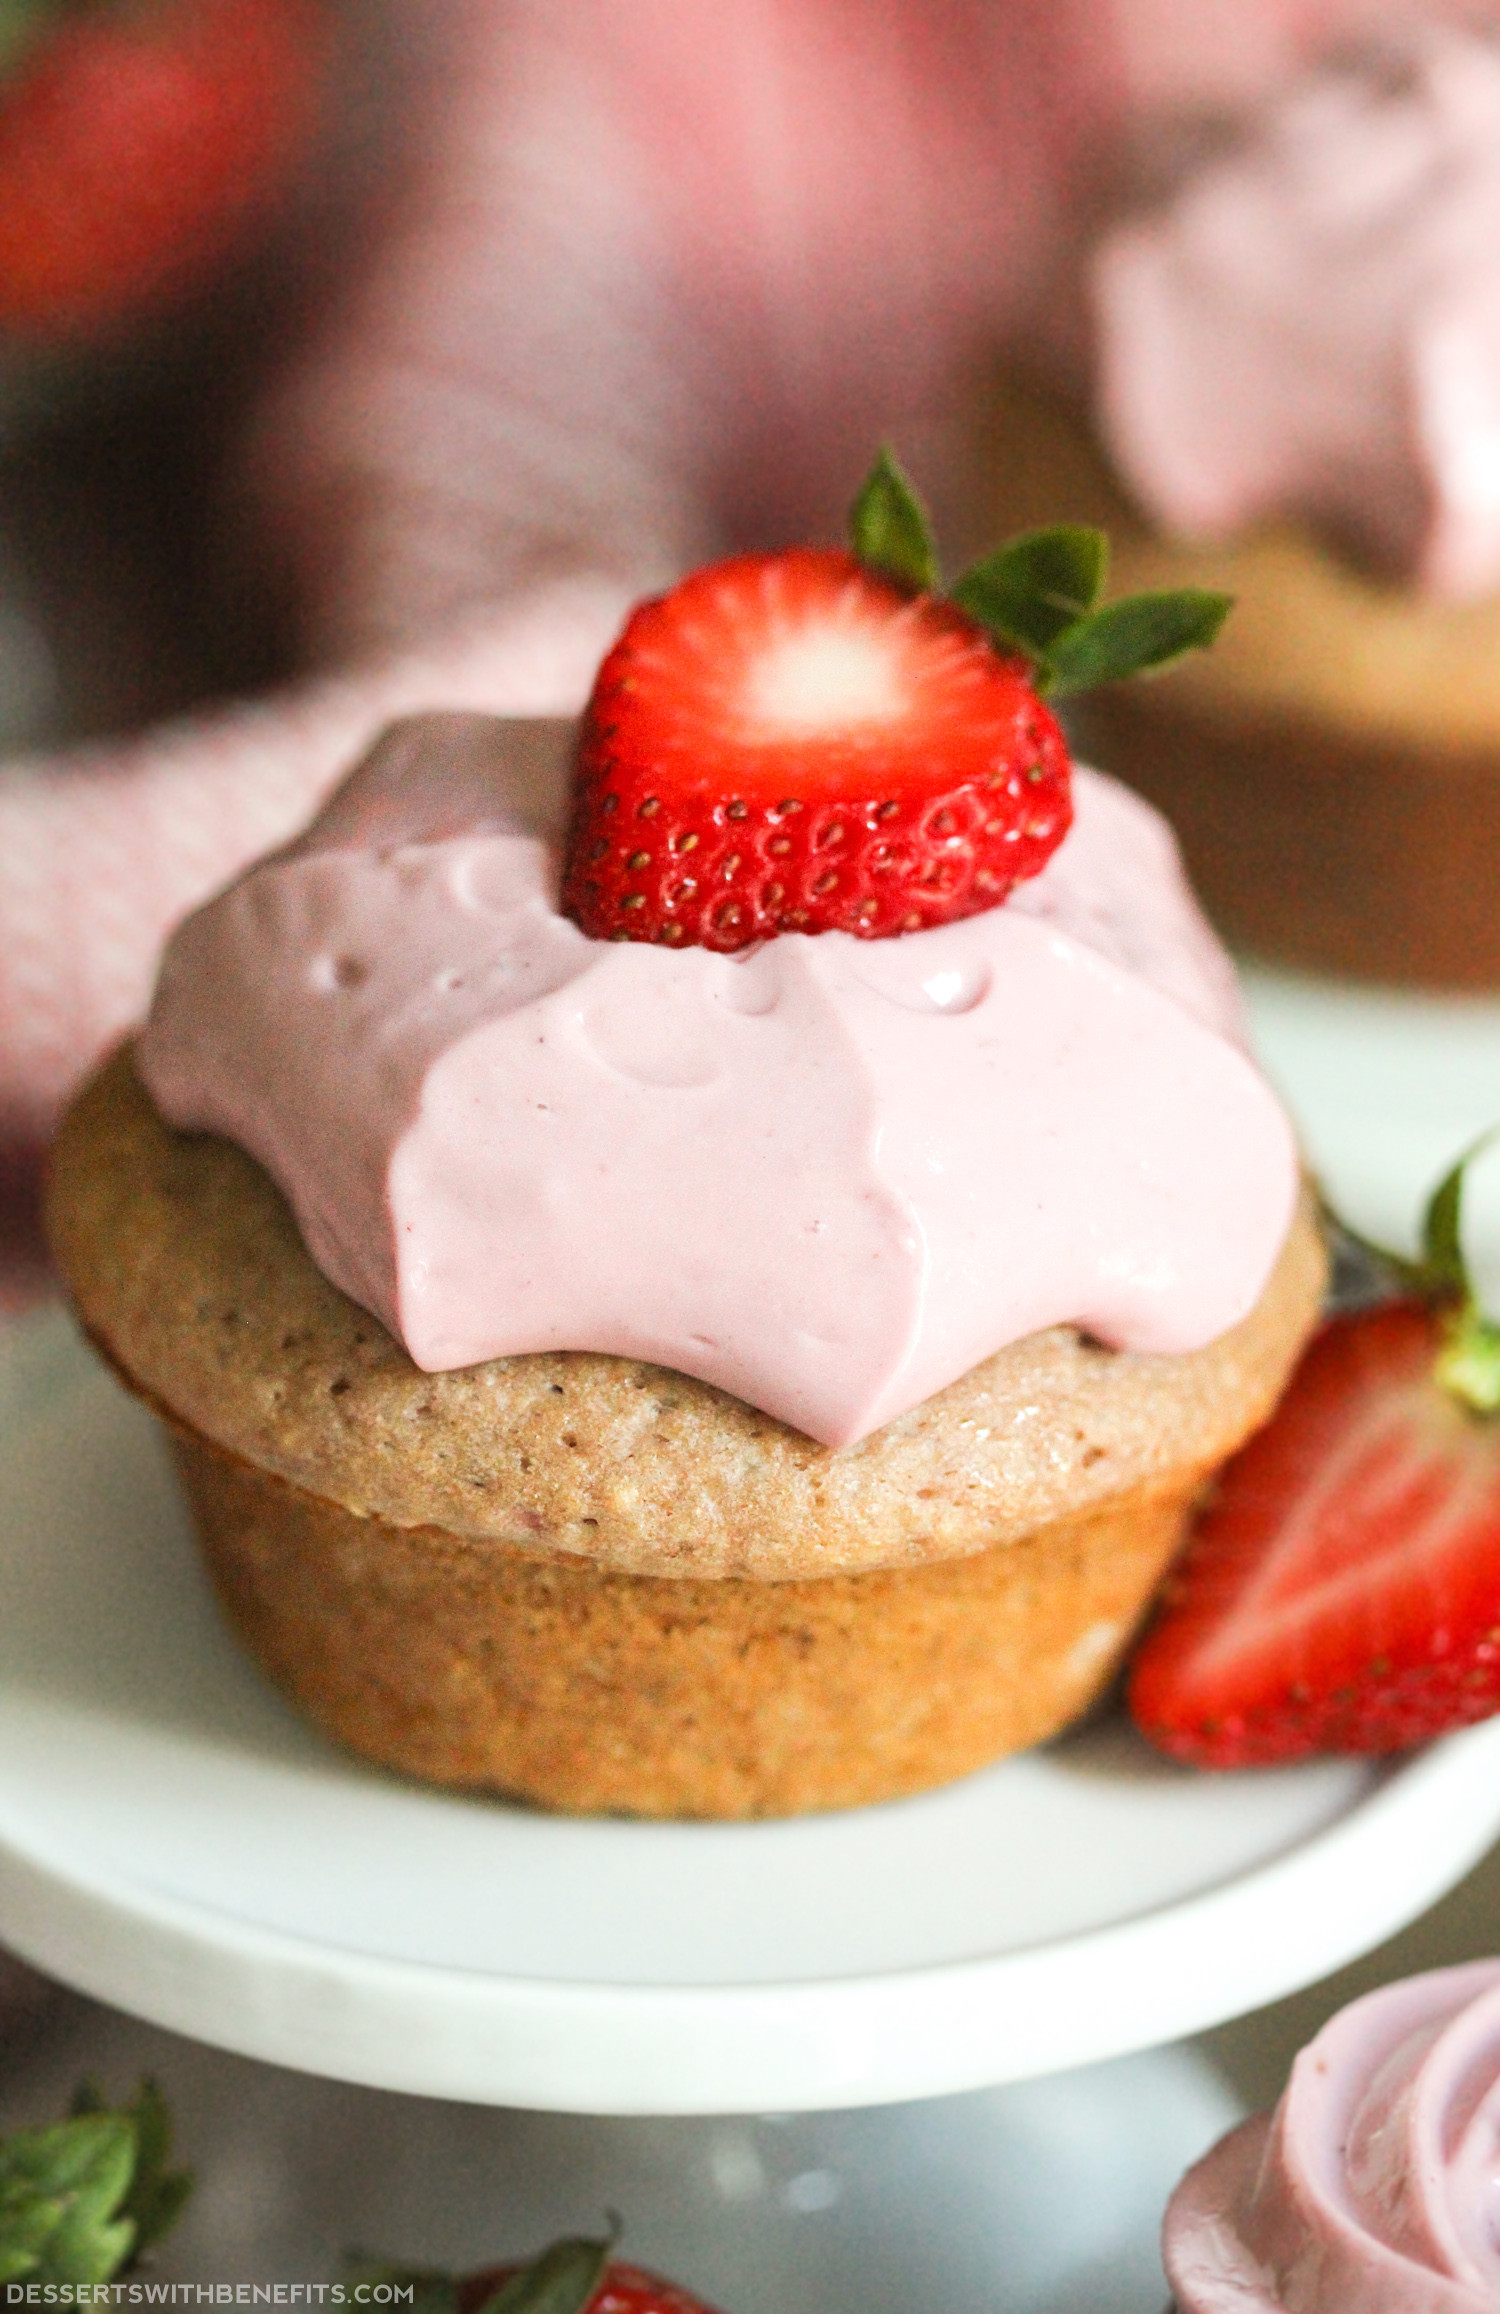 Strawberry Desserts Healthy
 Healthy Strawberry Cupcakes Recipe